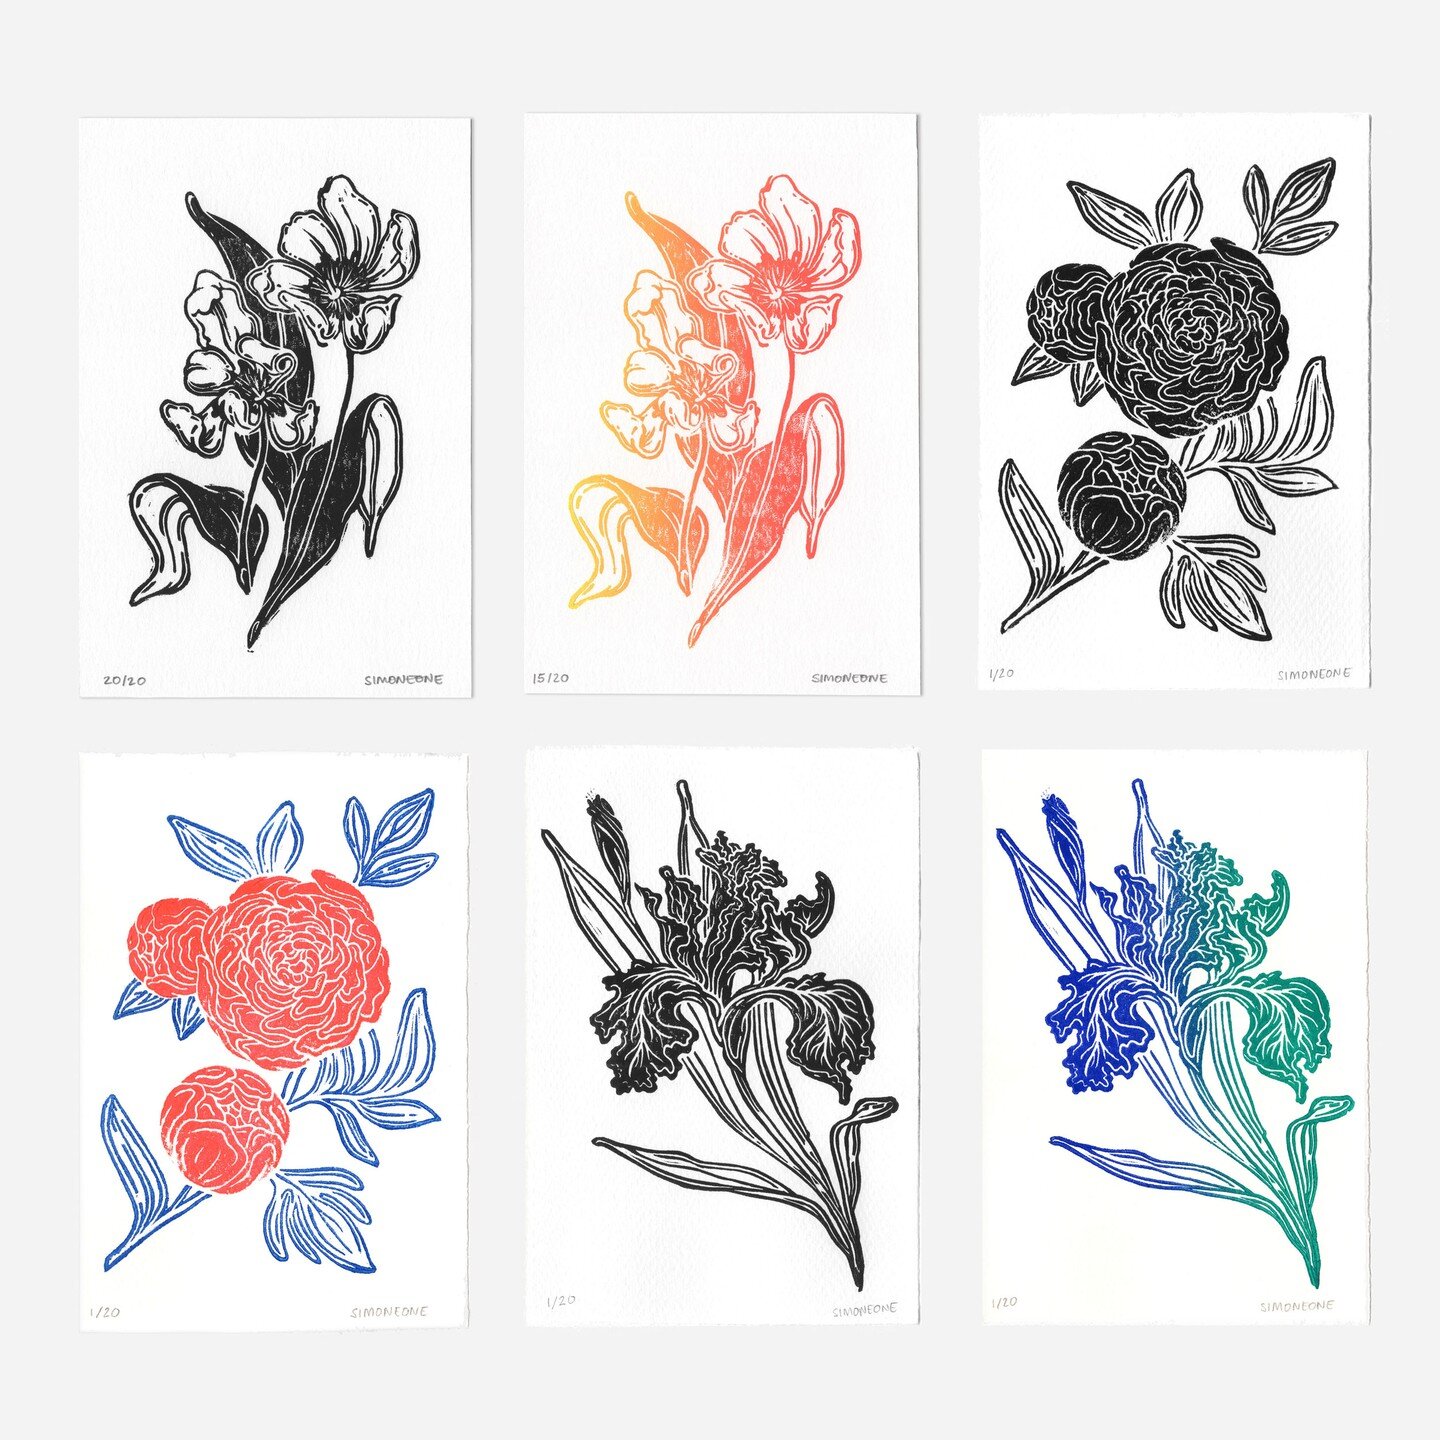 Don't miss your chance to see my linocut prints at @helvella.art gallery in Oakland until March 11! Tulips (B&amp;W) and Peonies (Color) have currently sold at the show, but since they each are from a limited edition series of 20 prints you can still